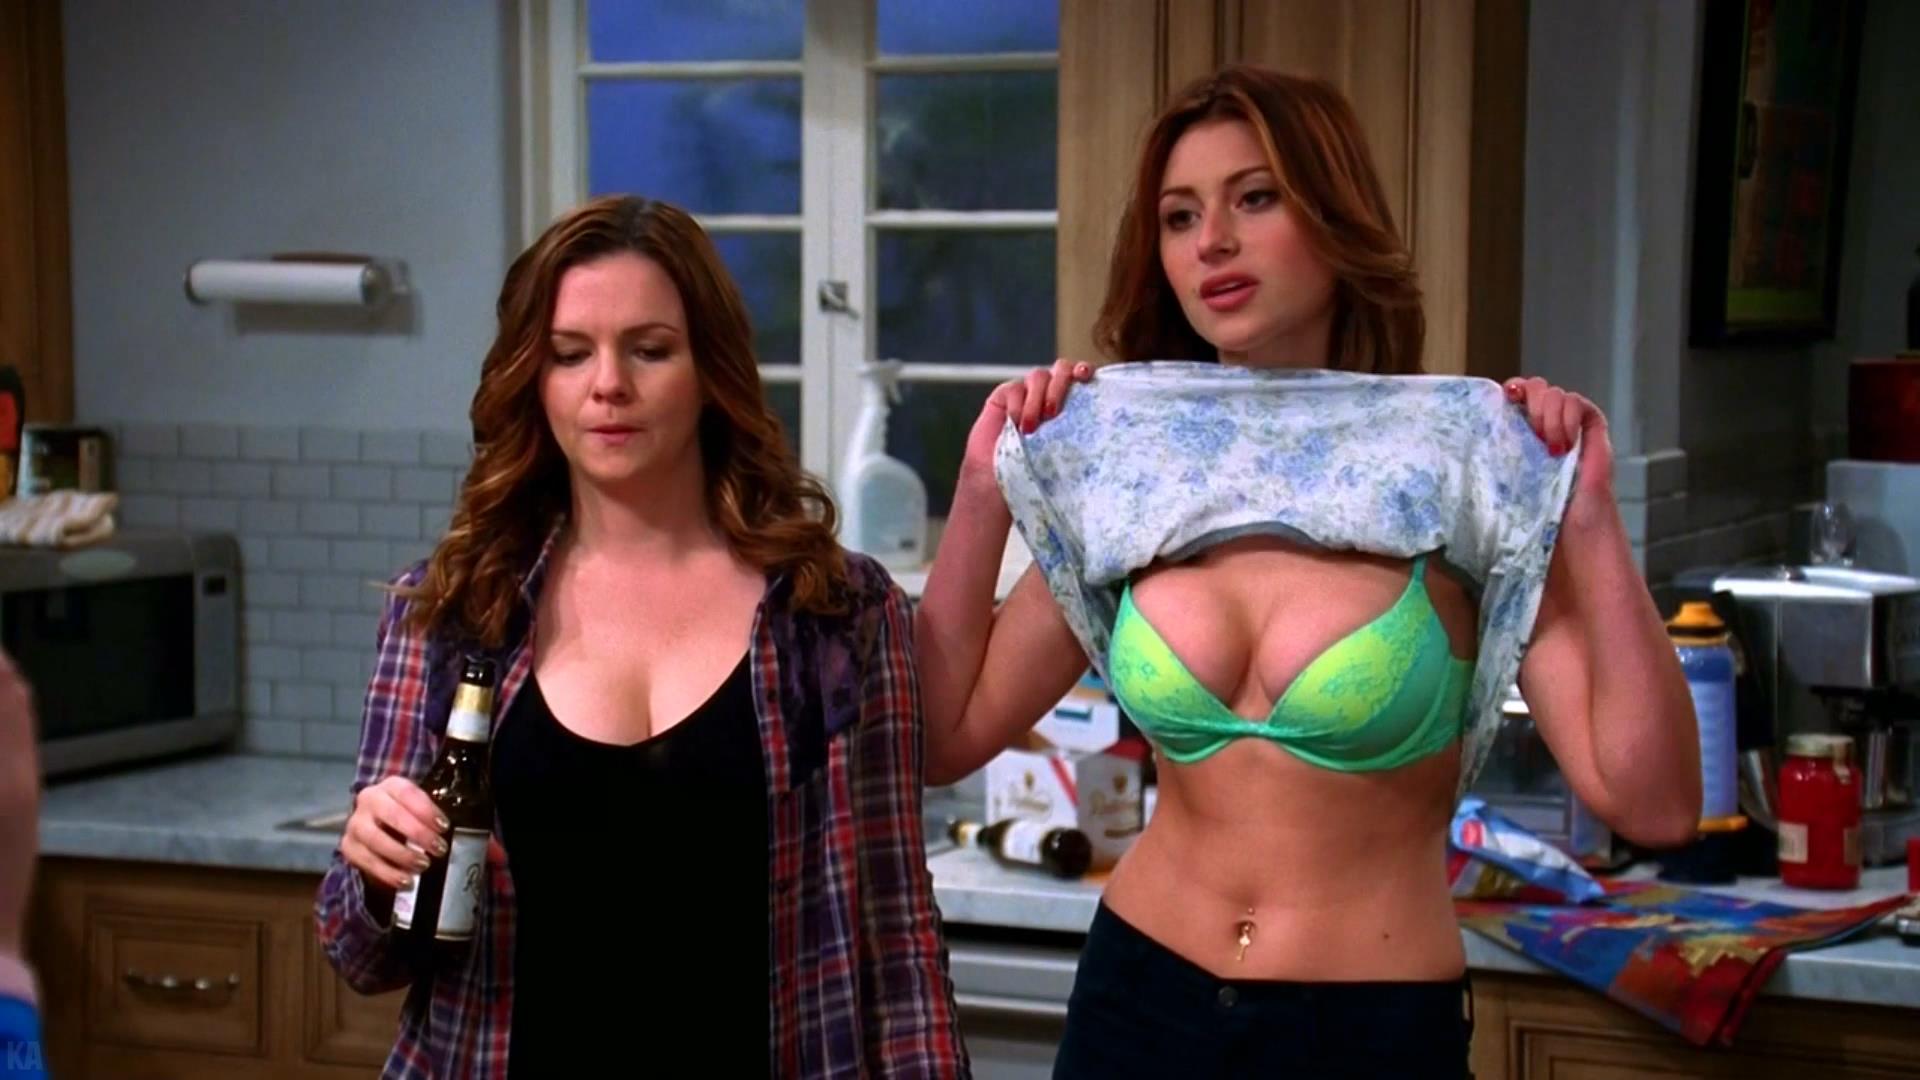 From naked a half men chelsea and two Chelsea Clinton